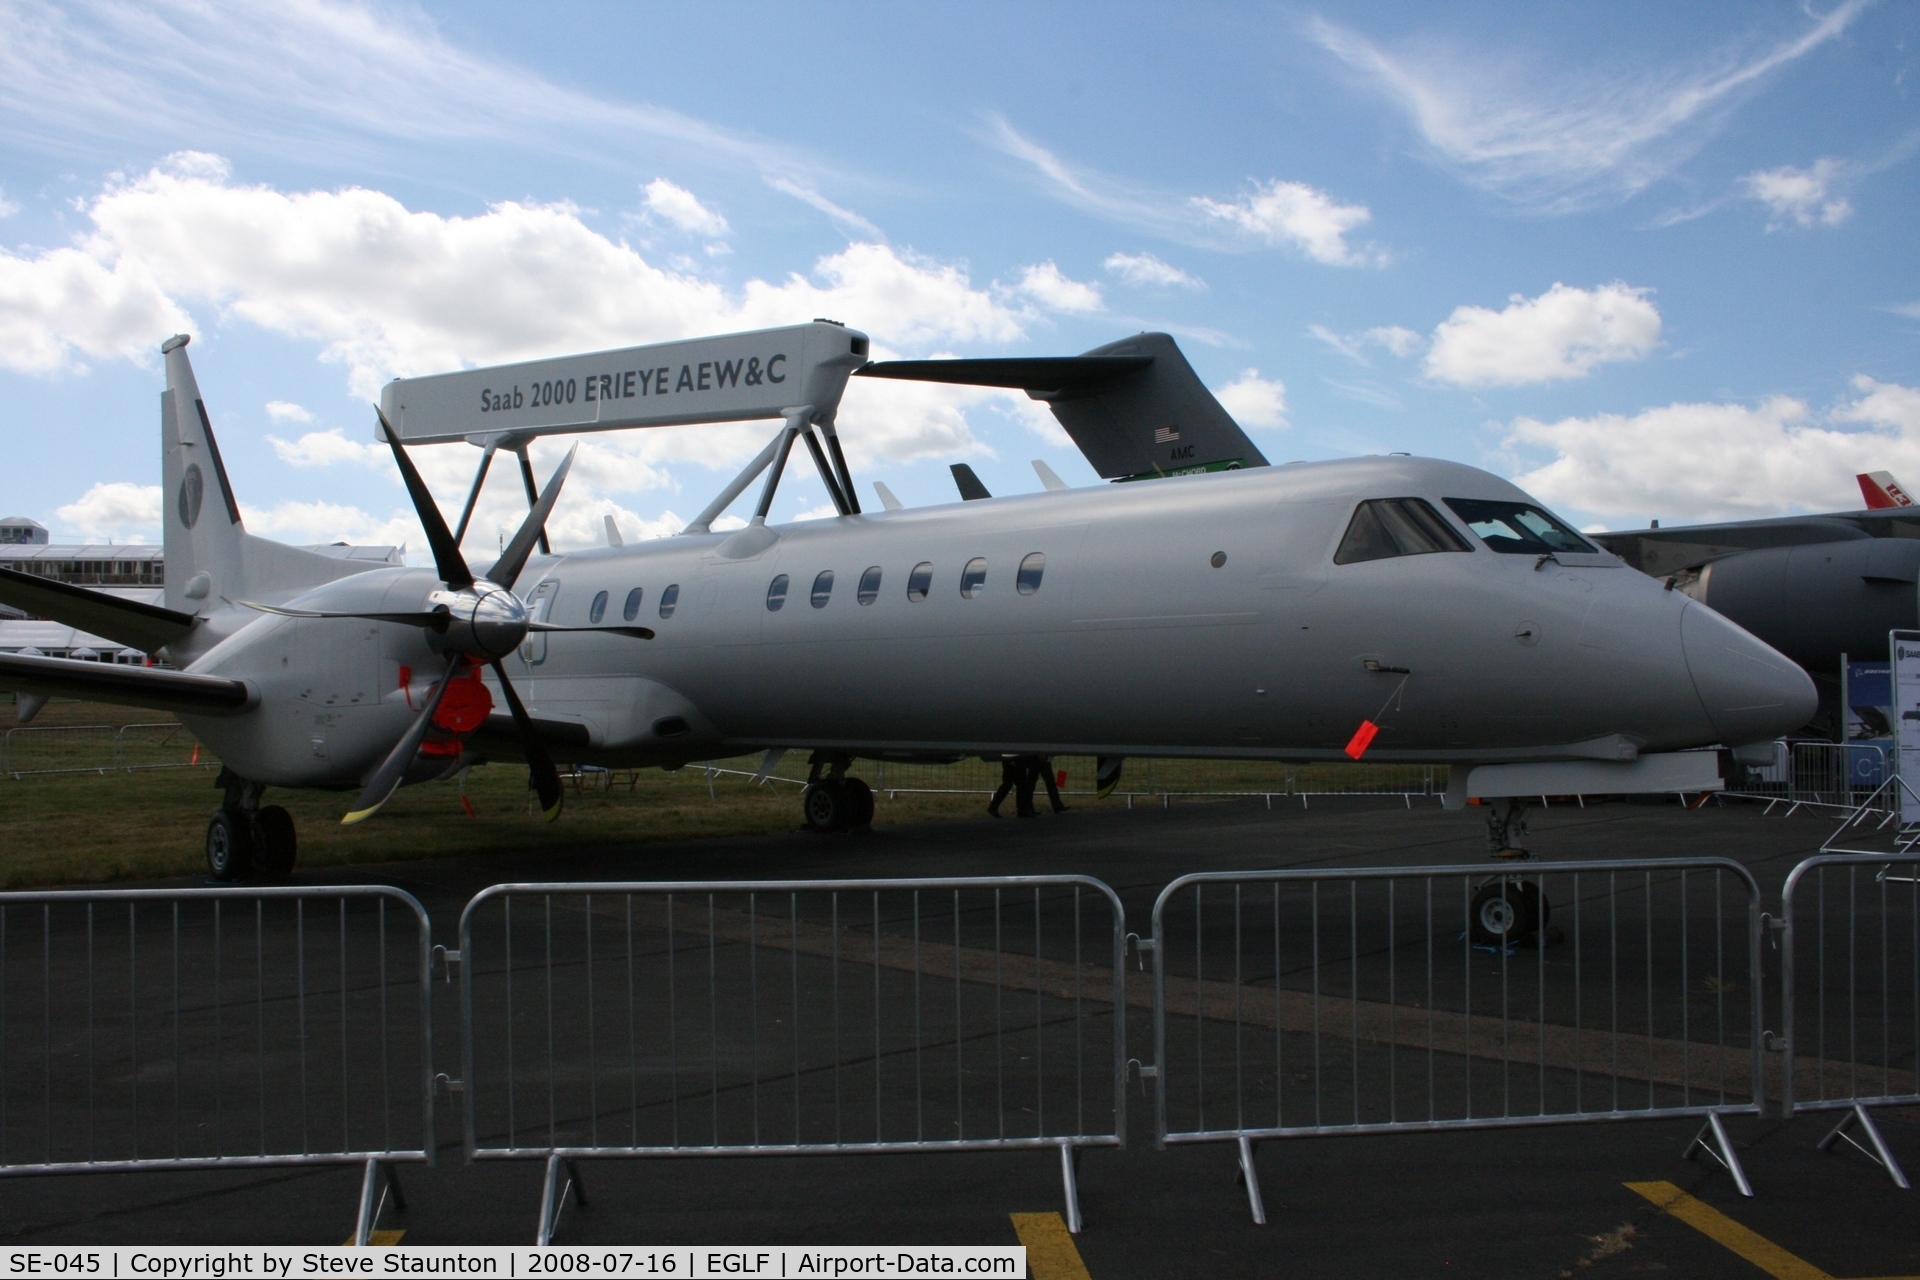 SE-045, 1997 Saab 2000 C/N 2000-045, Taken at Farnborough Airshow on the Wednesday trade day, 16th July 2008